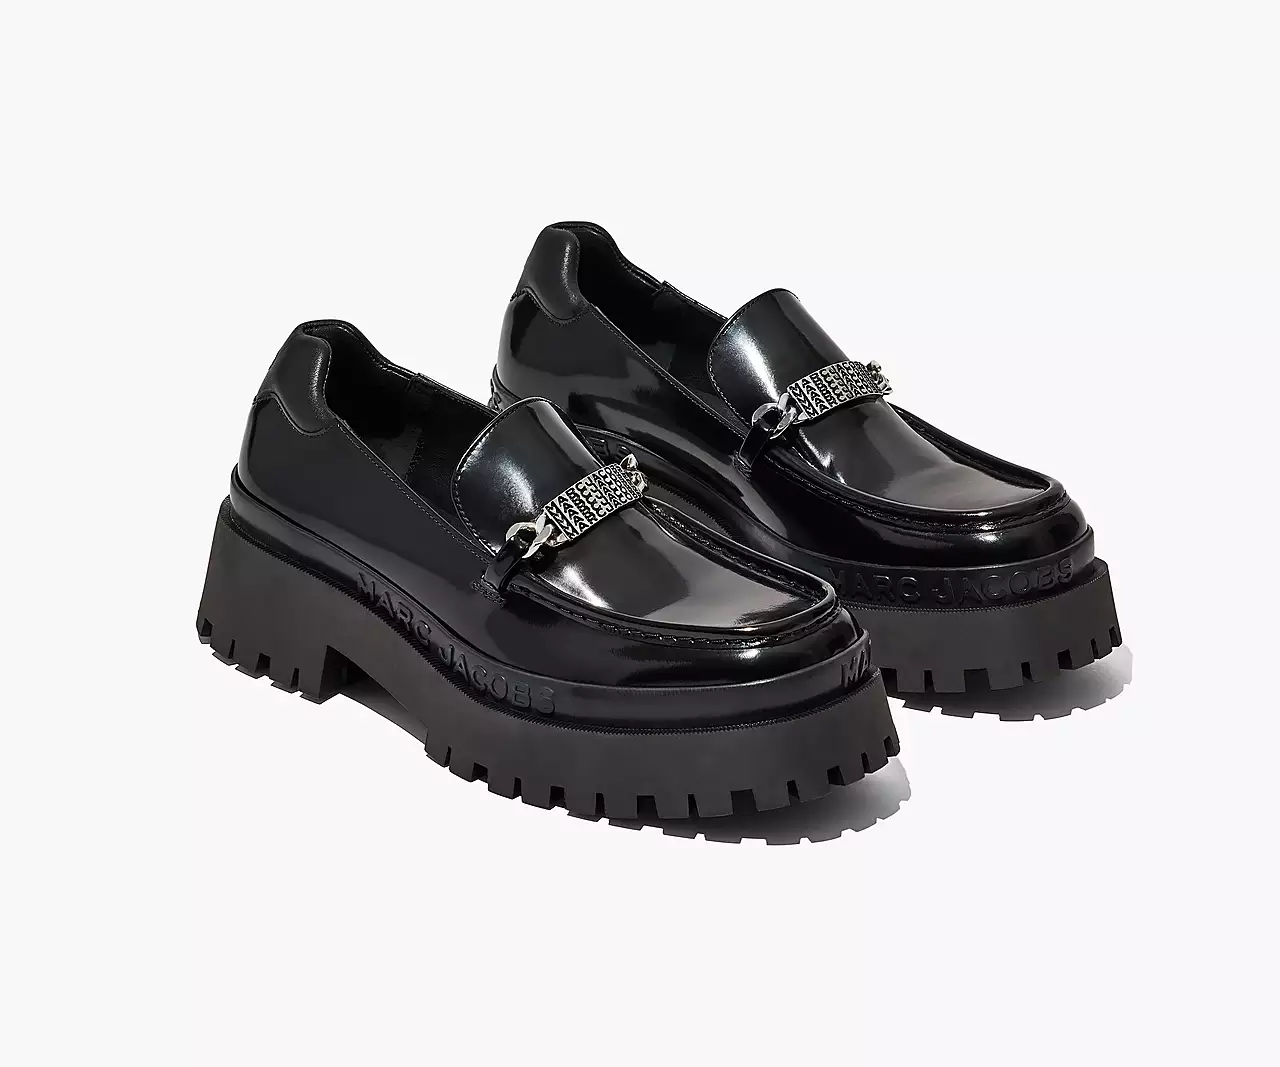 4. Marc Jacobs The Leather Barcode Monogram Loafer